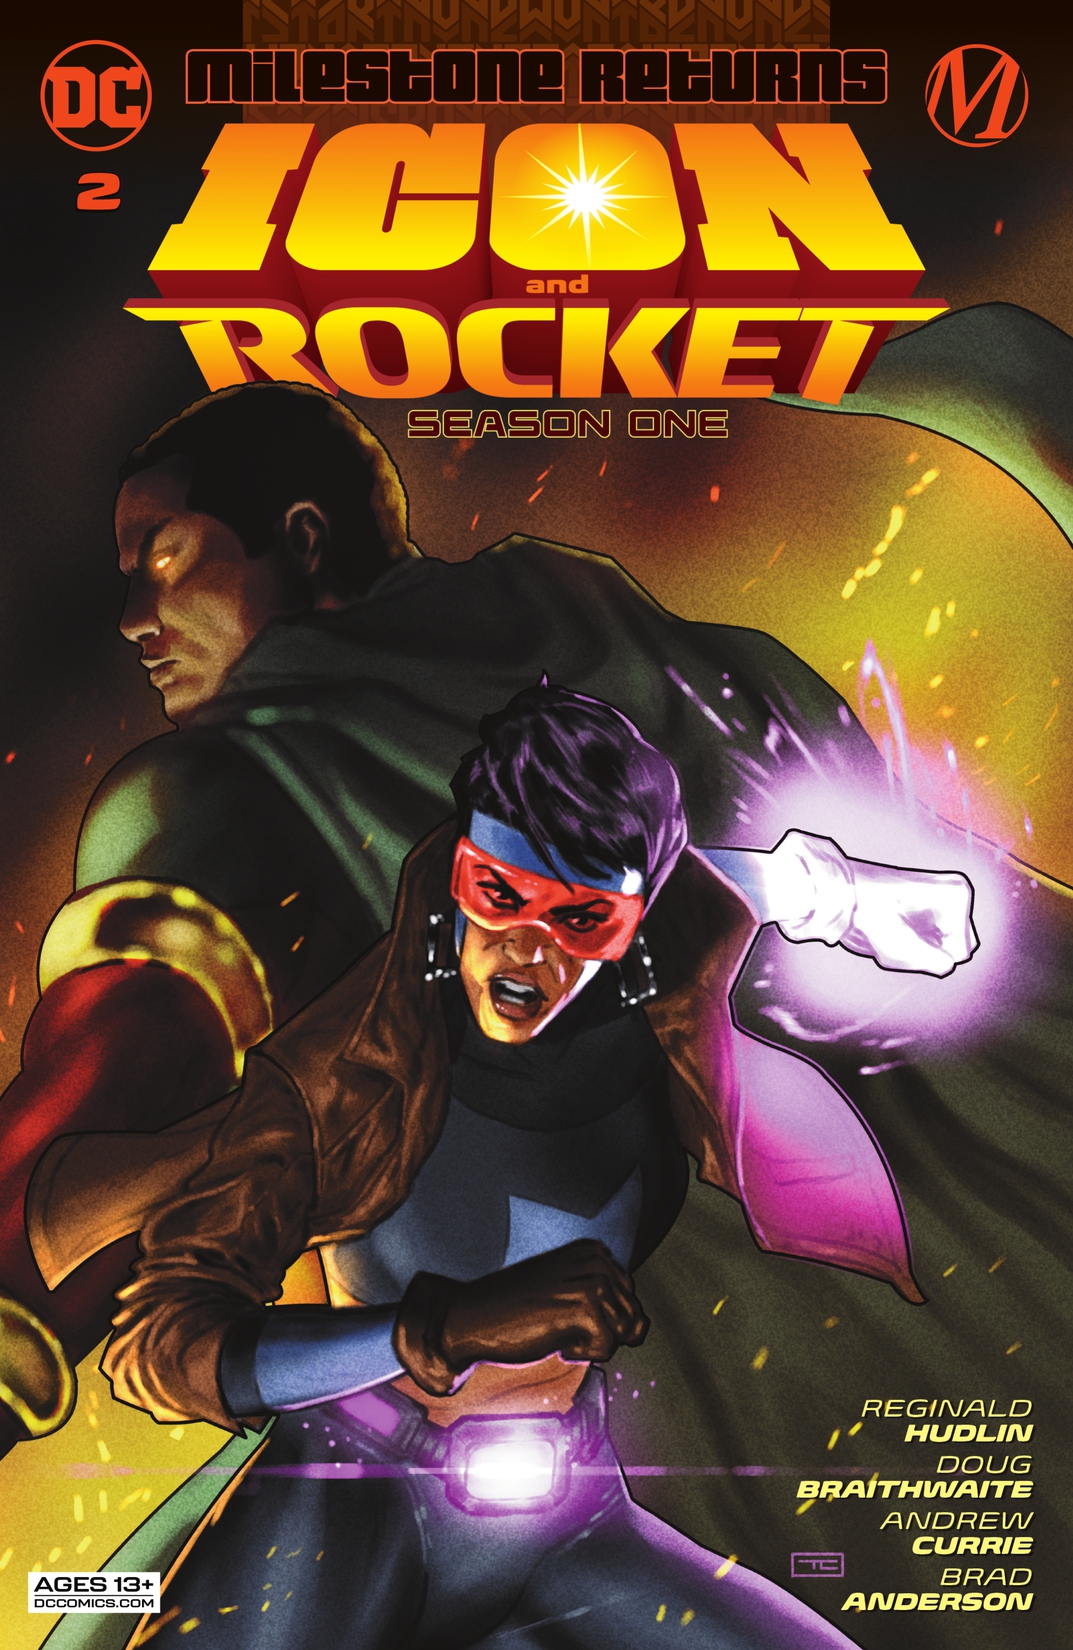 Icon & Rocket: Season One #2 preview images